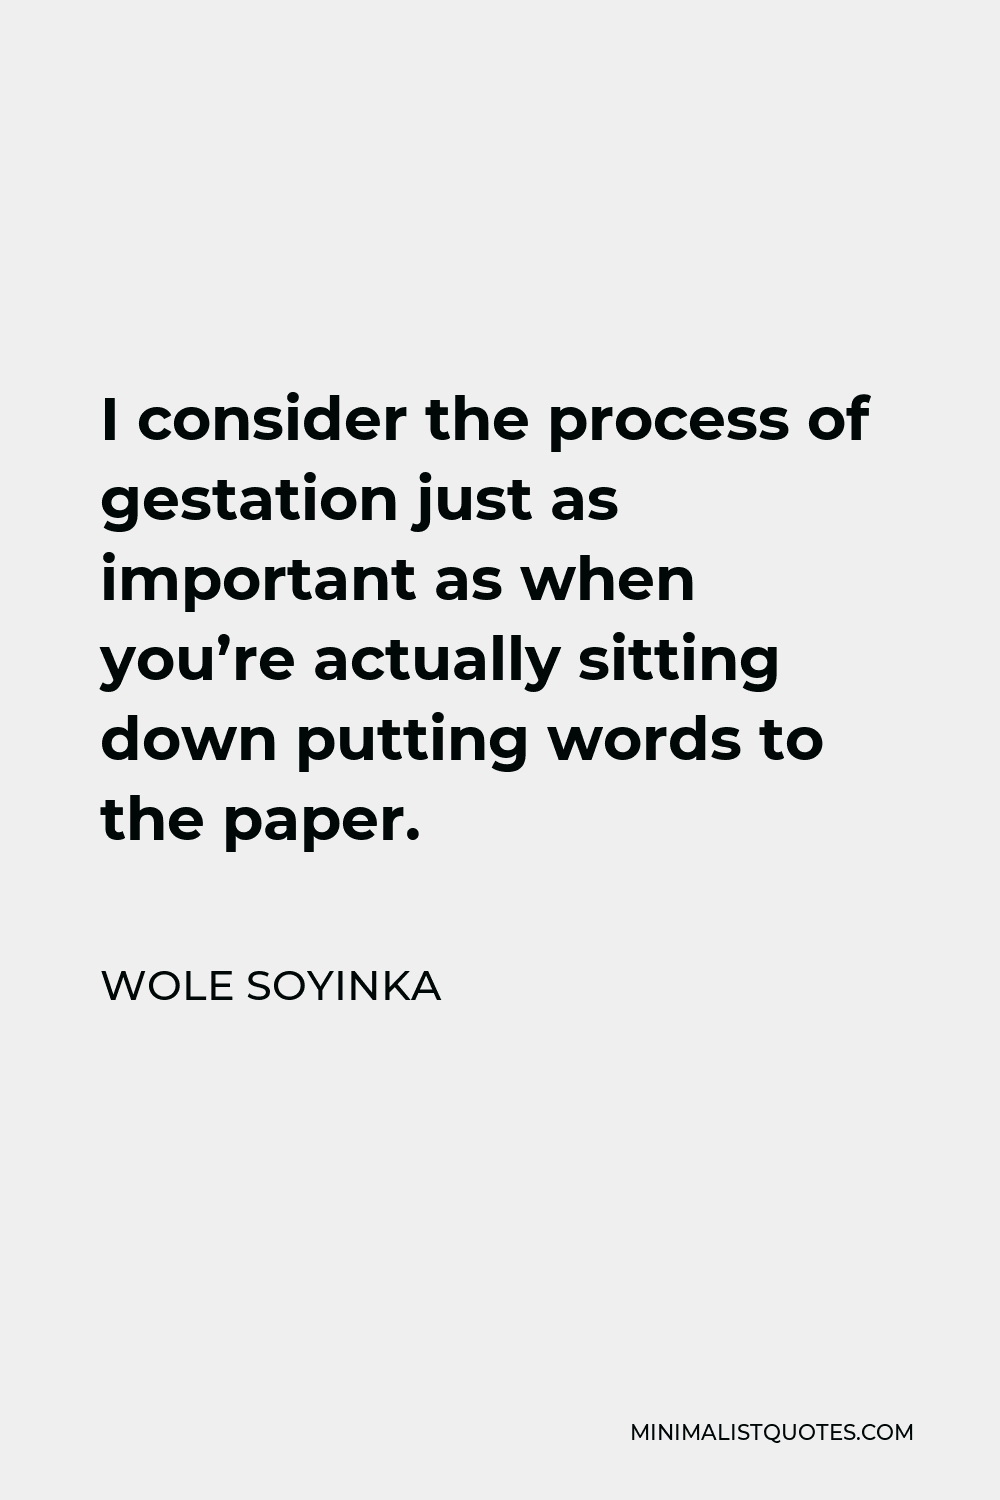 Wole Soyinka Quote - I consider the process of gestation just as important as when you’re actually sitting down putting words to the paper.